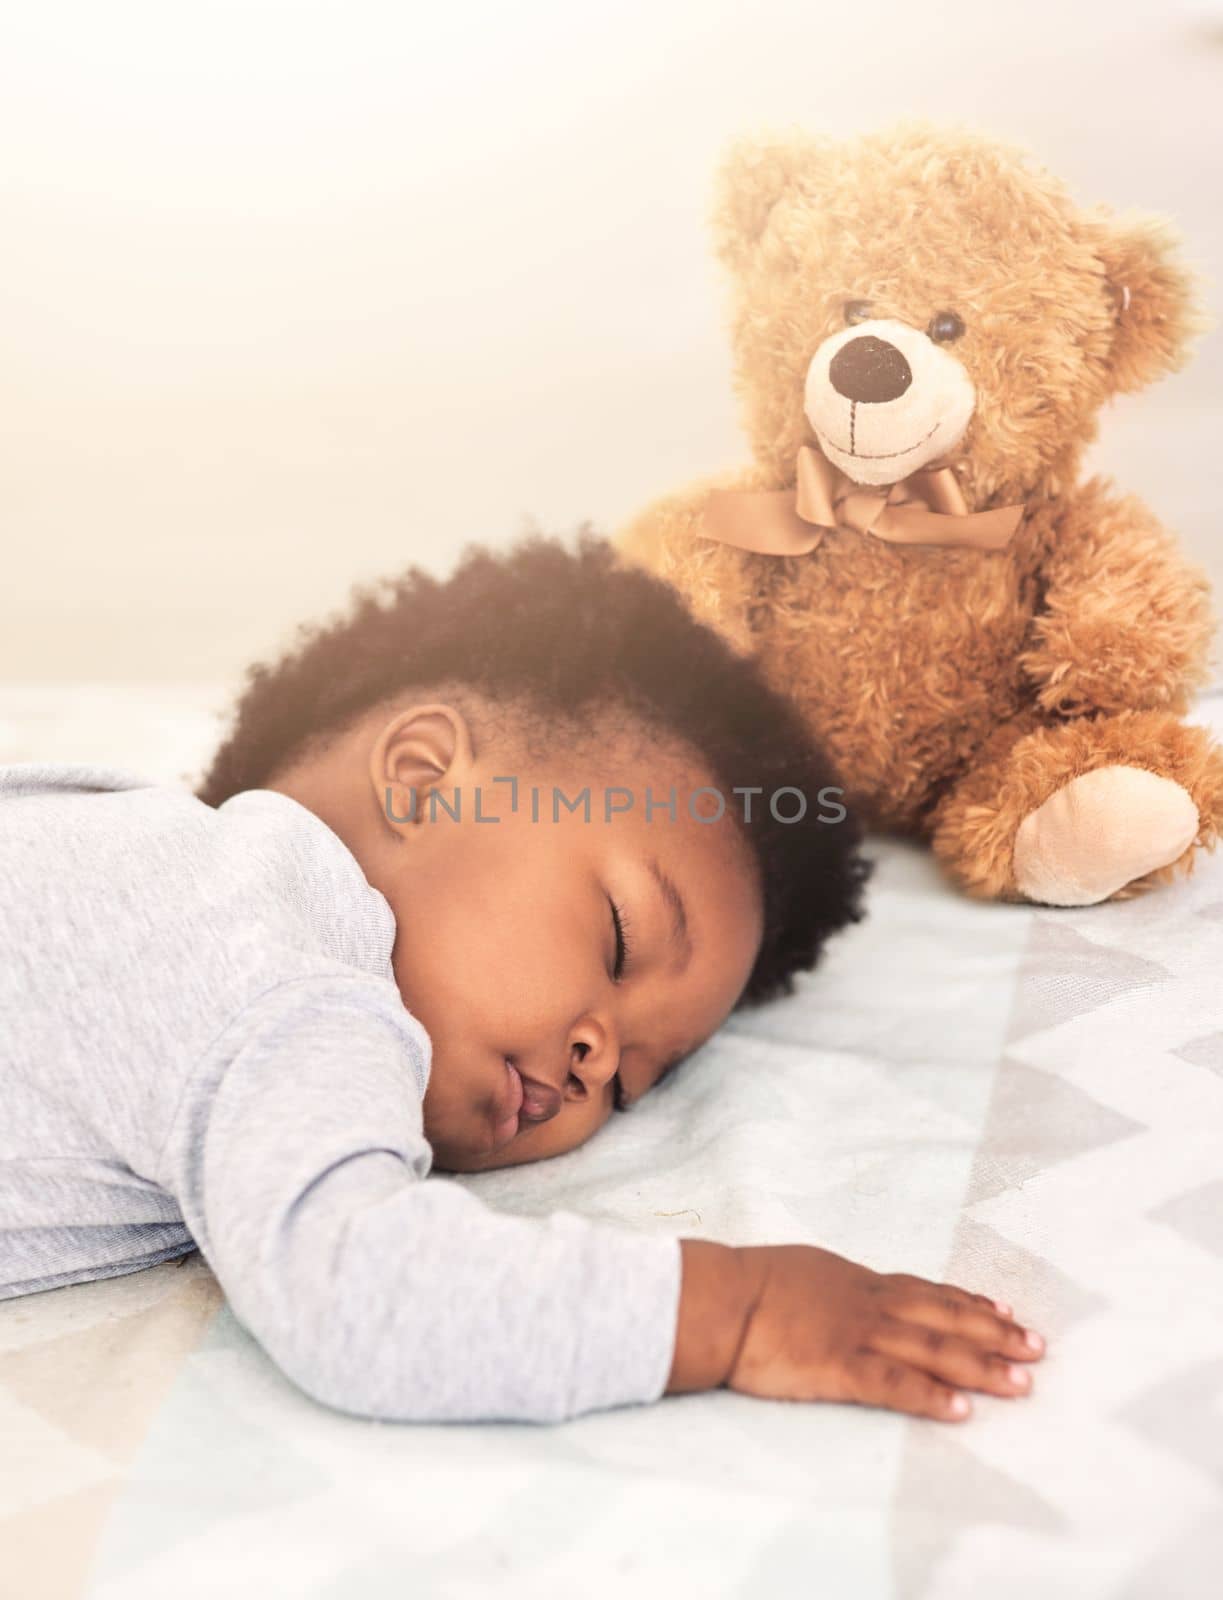 Teddy watches over him while he sleeps. a little baby boy sleeping on a bed